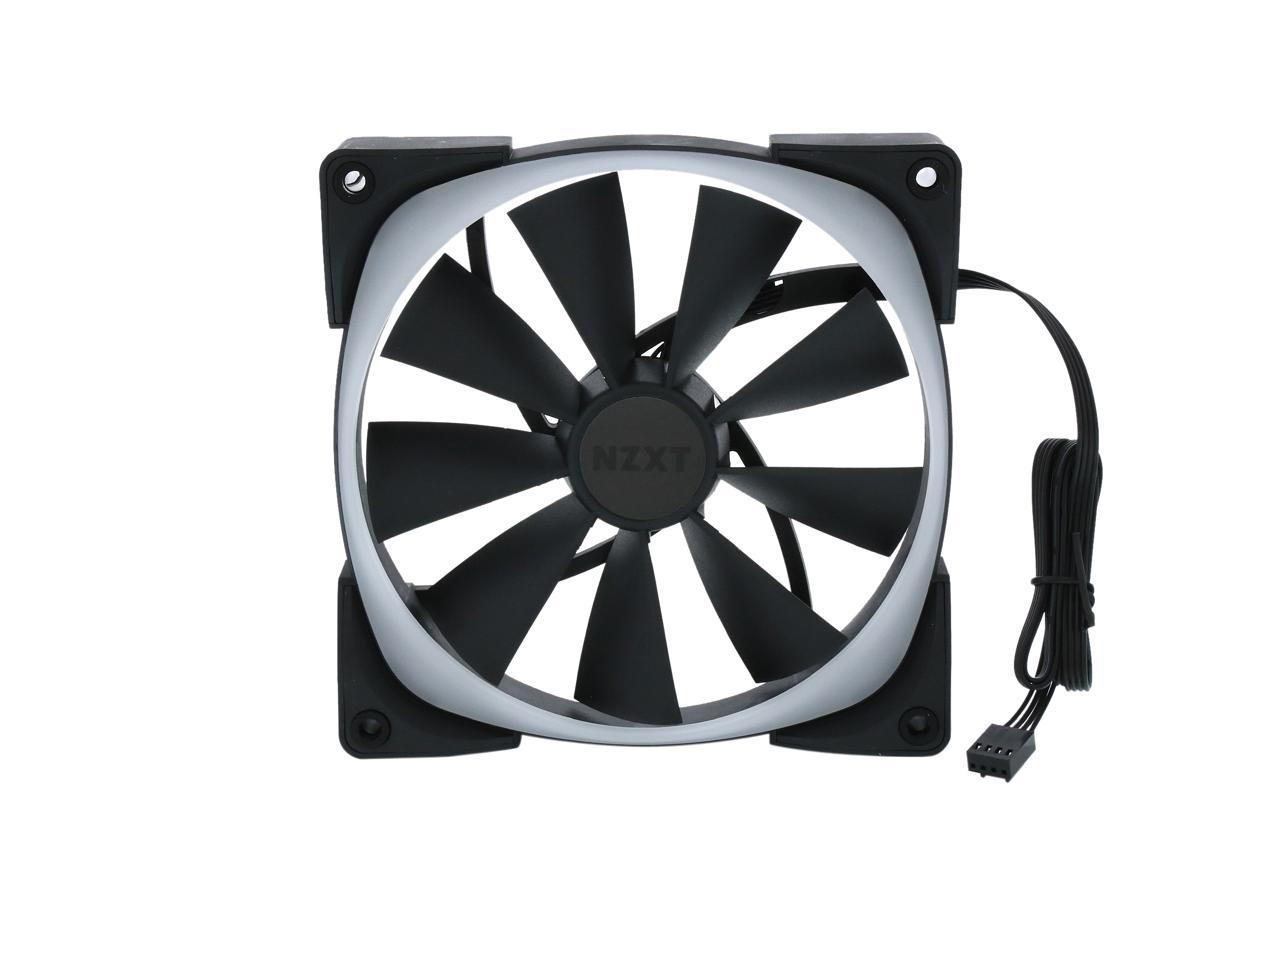 Nzxt Rf Ar140 B1 Rgb Led Aer Rgb140 Advanced Rgb Led Pwm Fan For Hue Hue Is Required To Function And Sold Separately Newegg Com